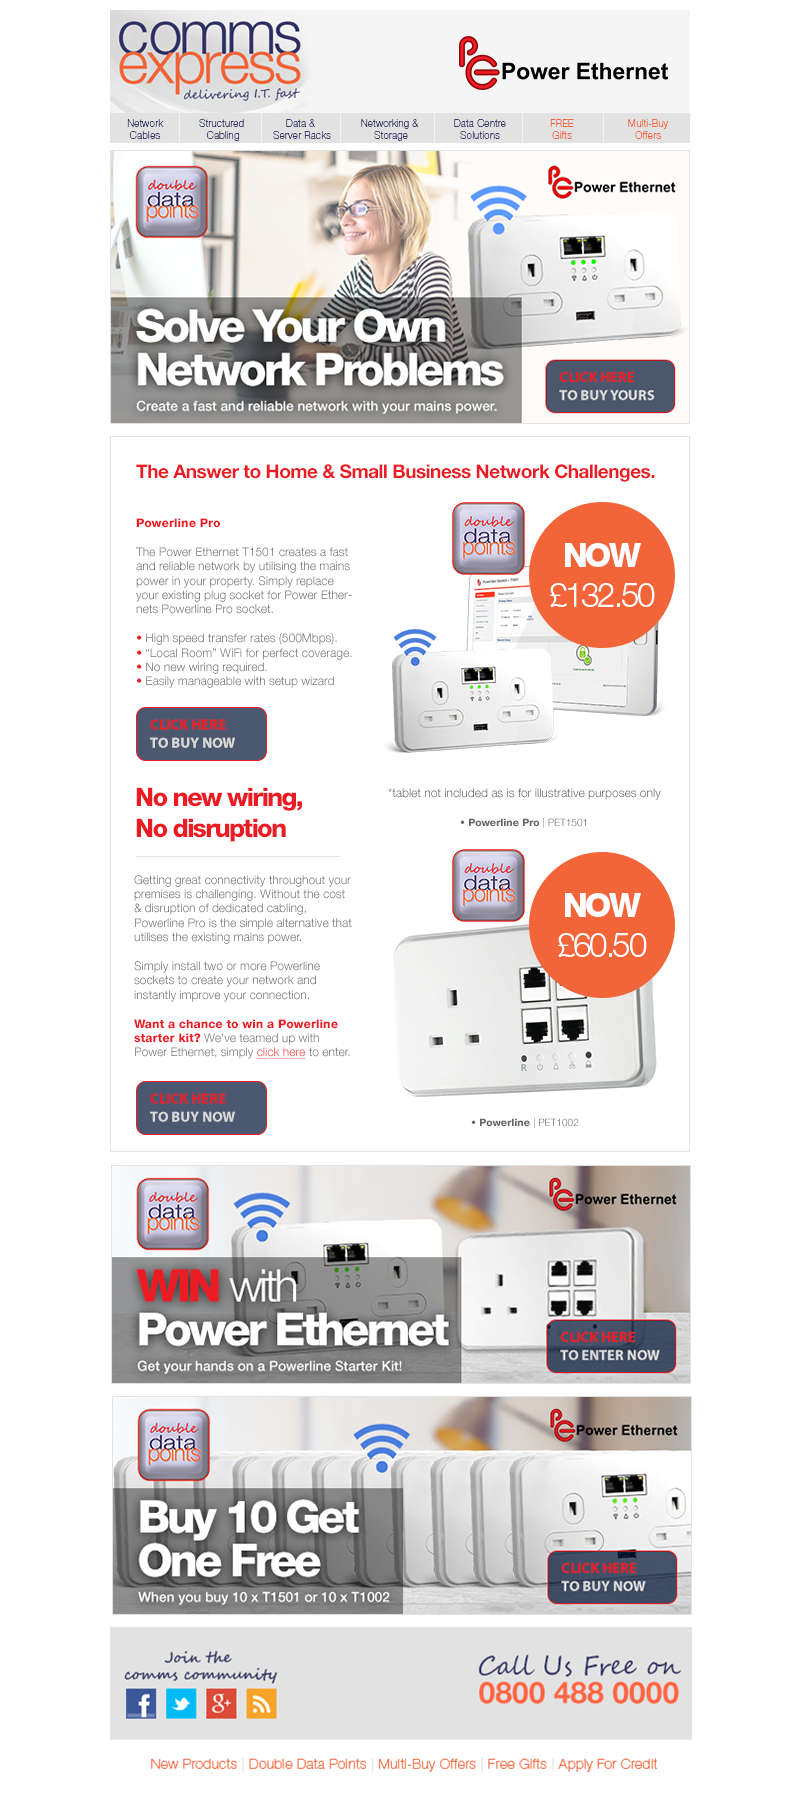 Answer Your Own Network Problems with Power Ethernet